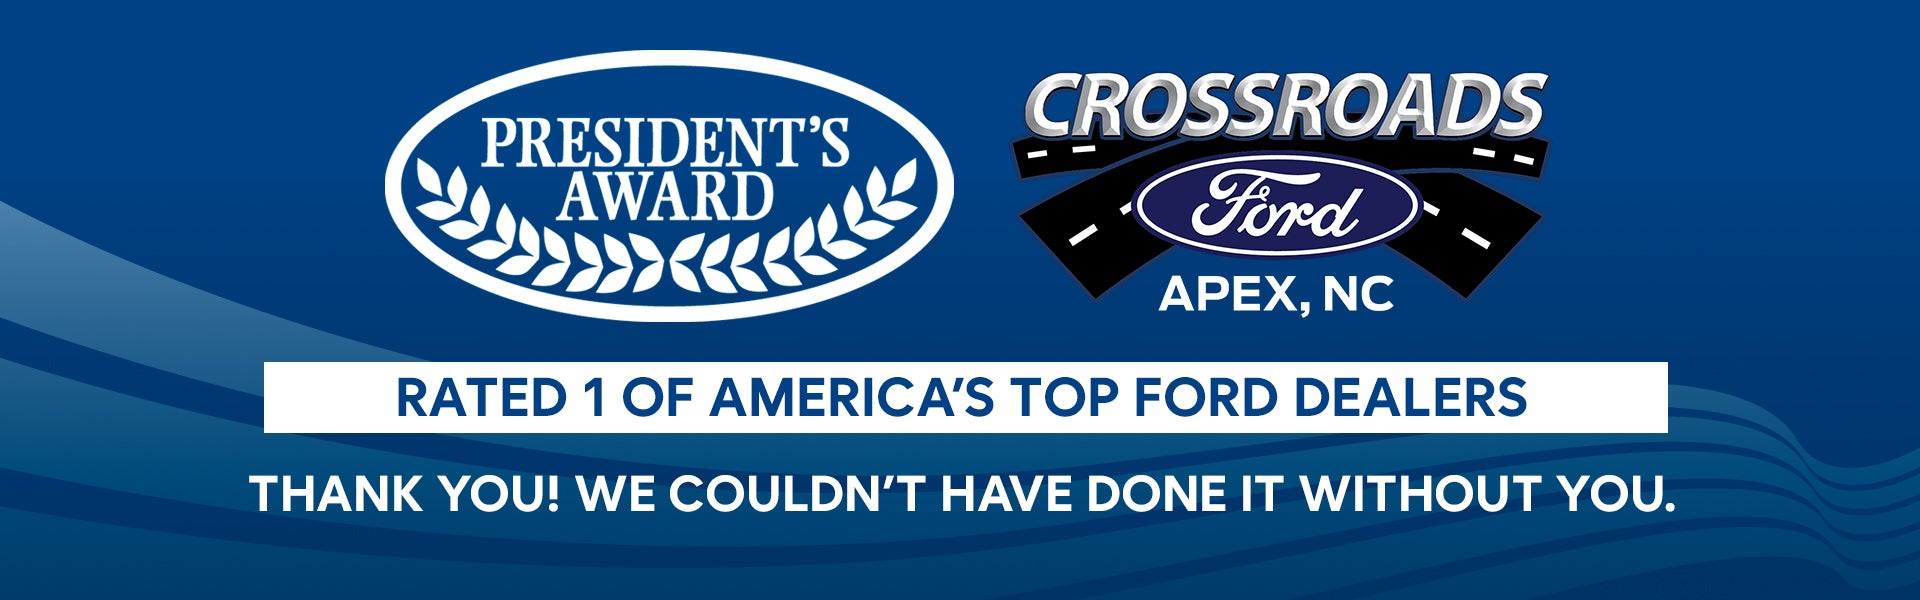 President's Award Top Rated Ford Dealer